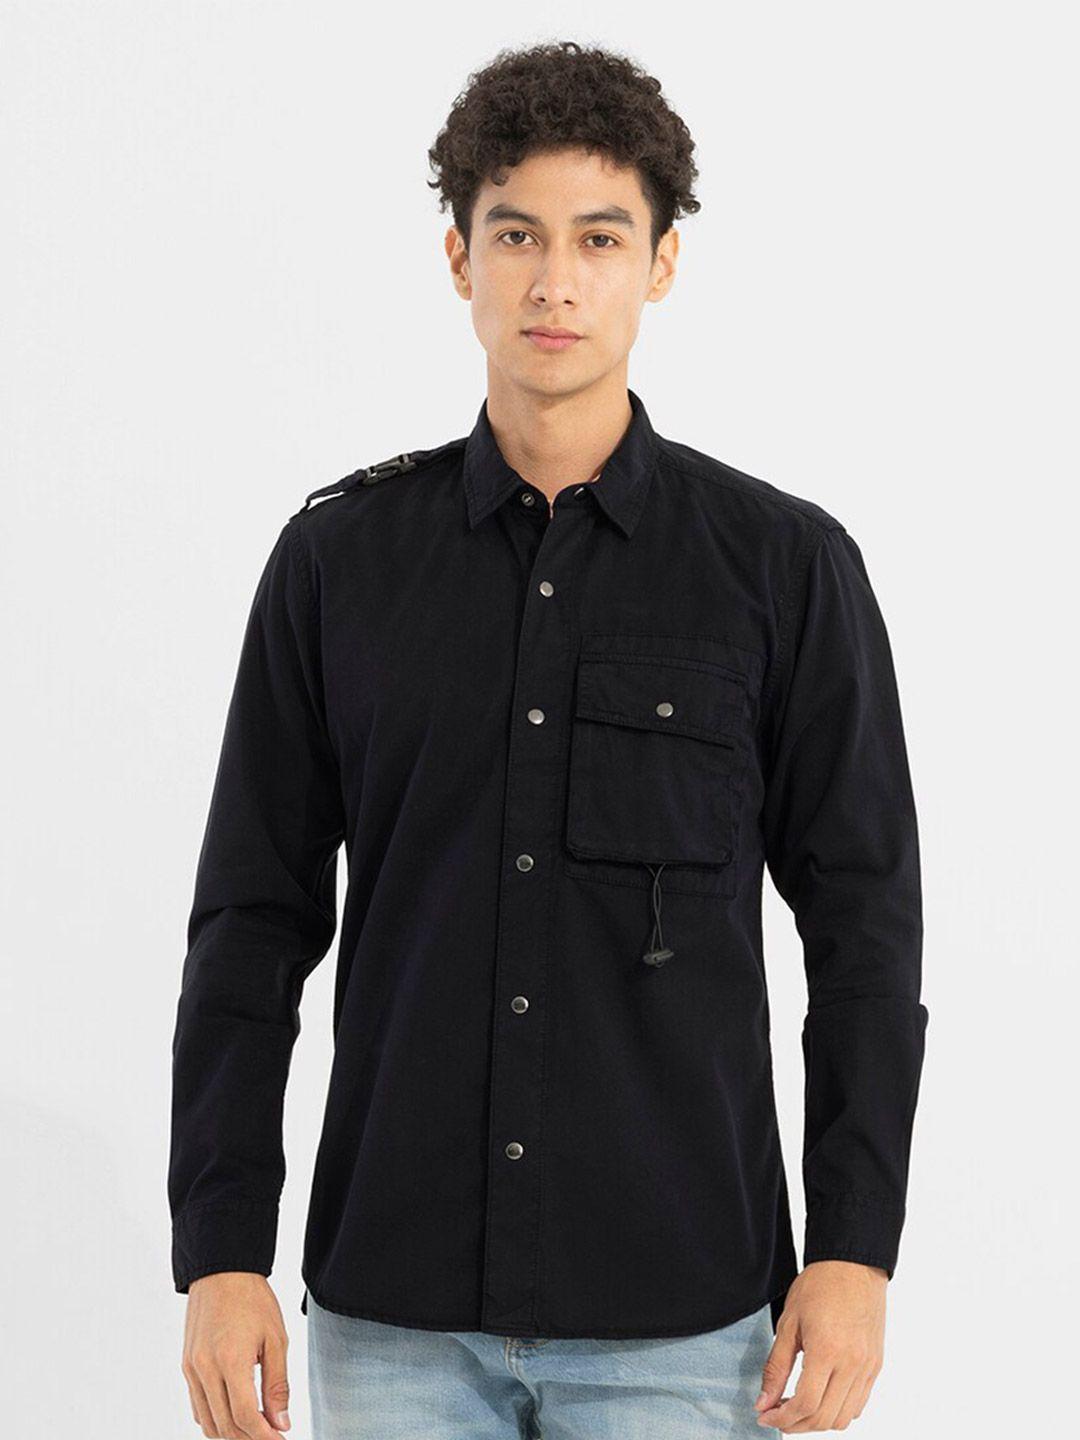 snitch-black-classic-regular-fit-spread-collar-opaque-cotton-casual-shirt